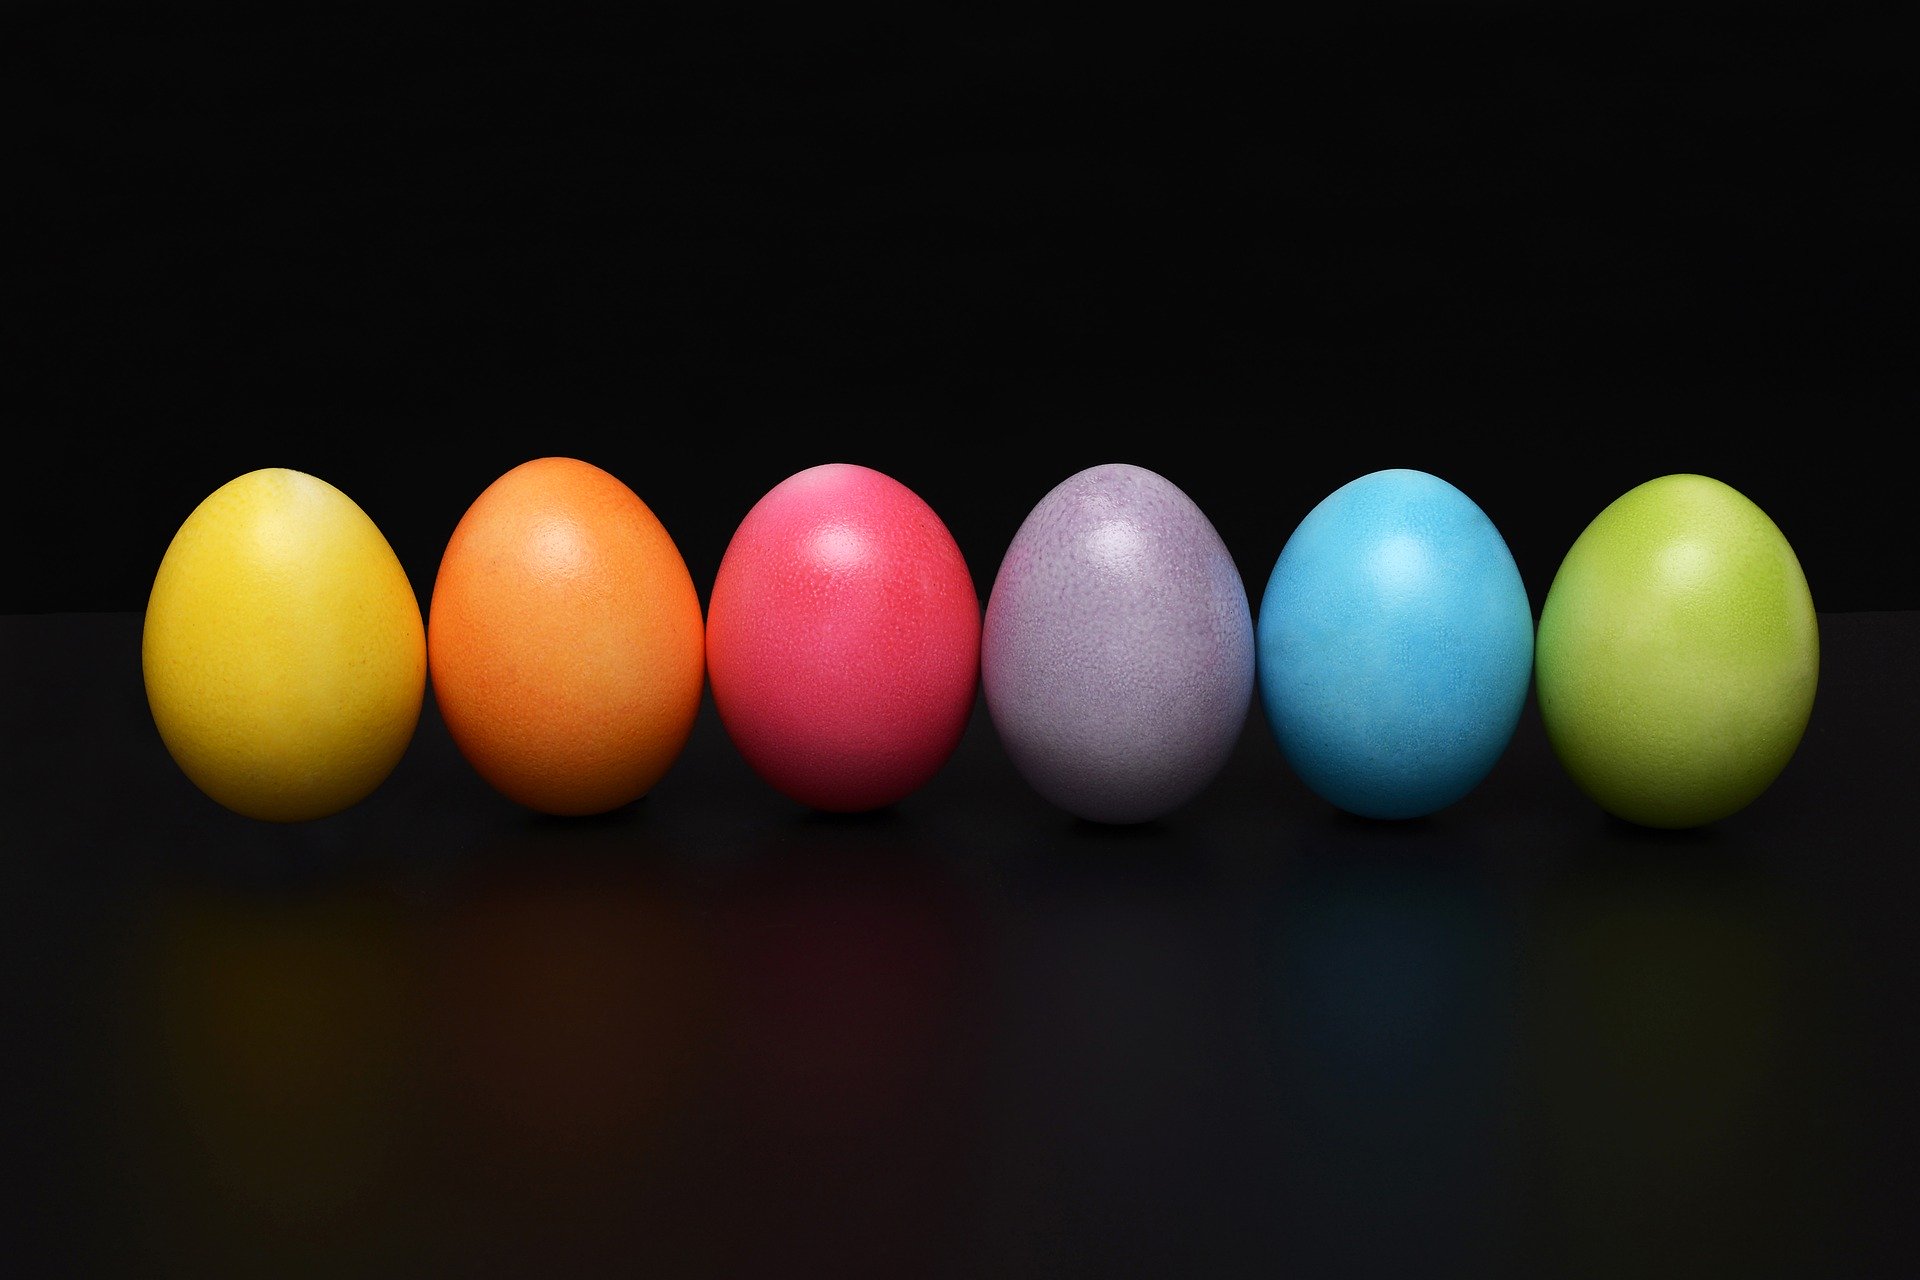 Our Riddle is about colors. The picture is of 6 different colored easter eggs.